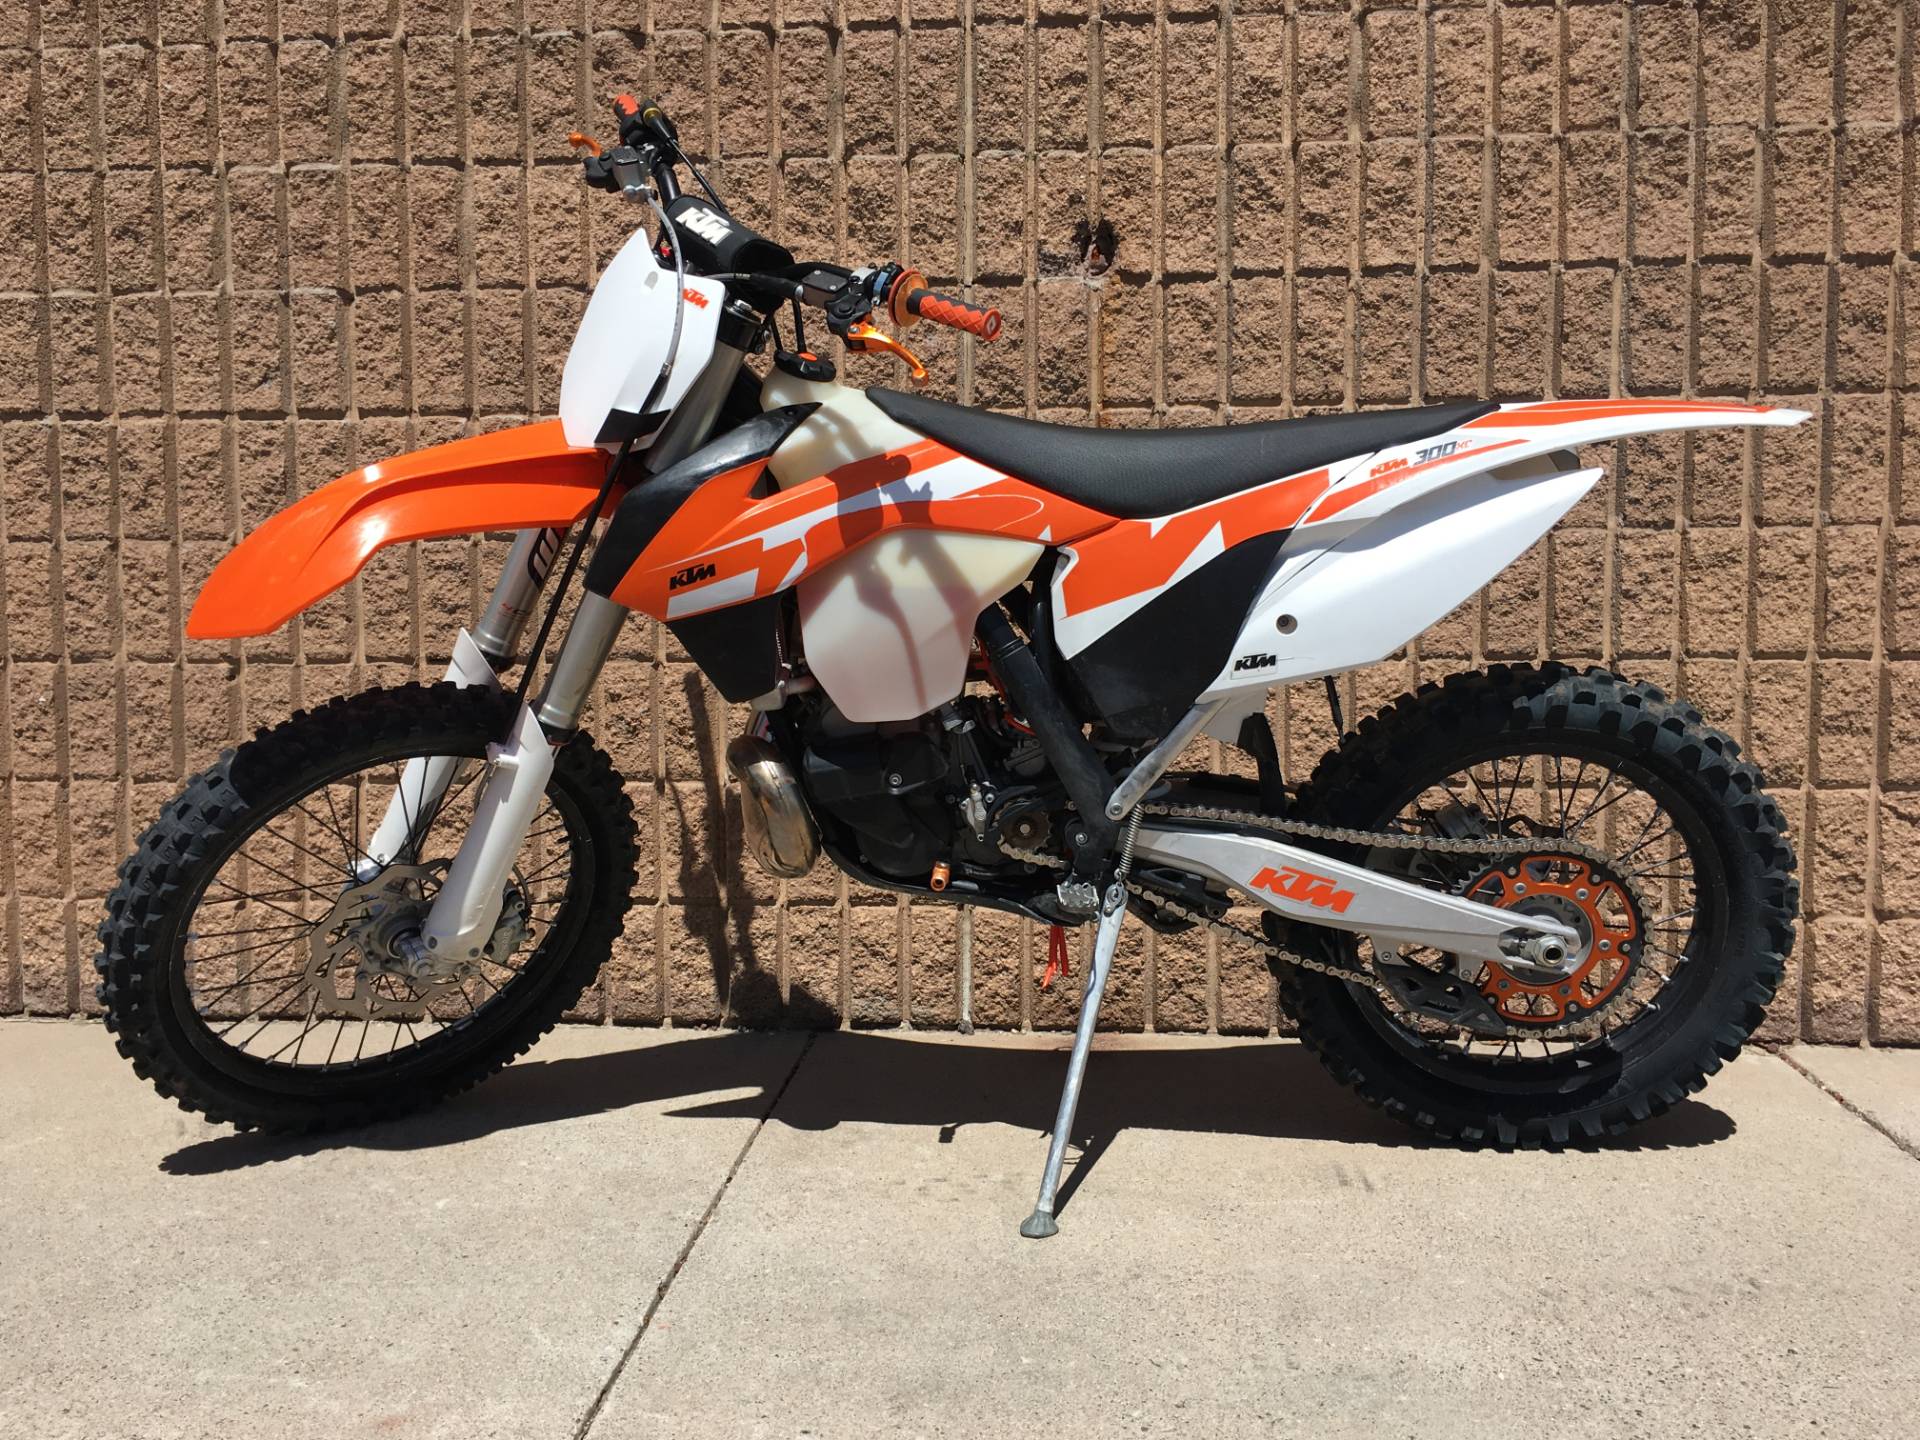 2016 Ktm Xc 300 For Sale 108 Used Motorcycles From $6,998